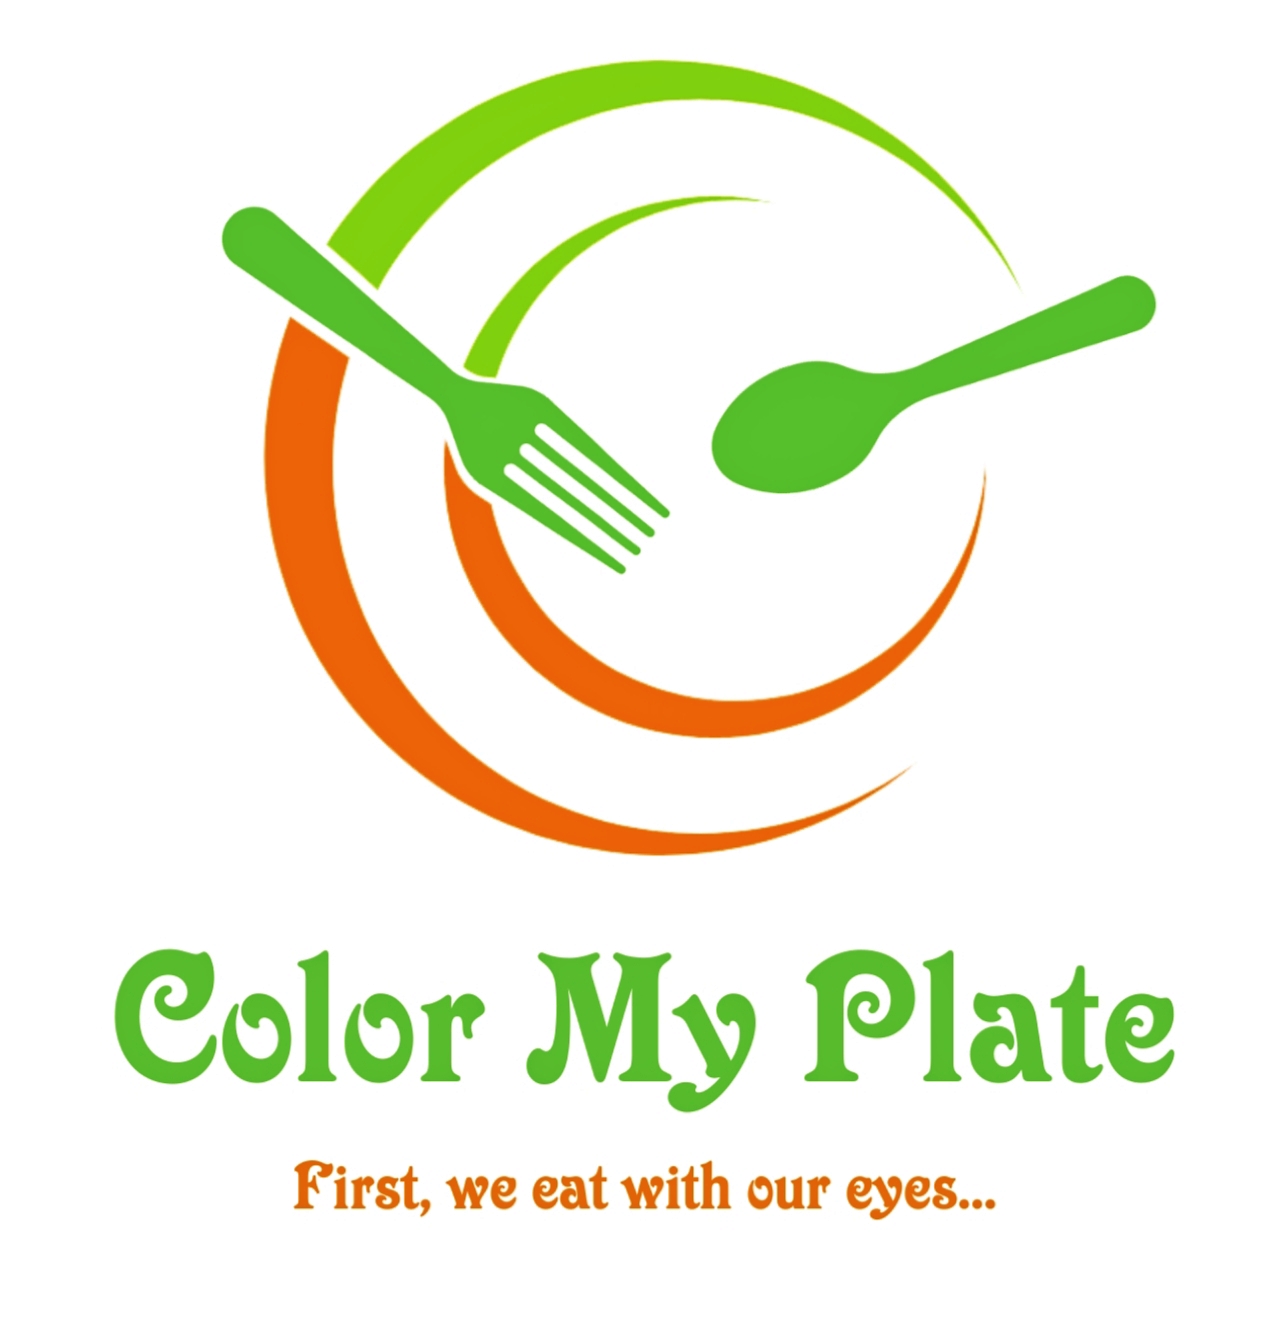 Color My Plate (#ColorMyPlate)